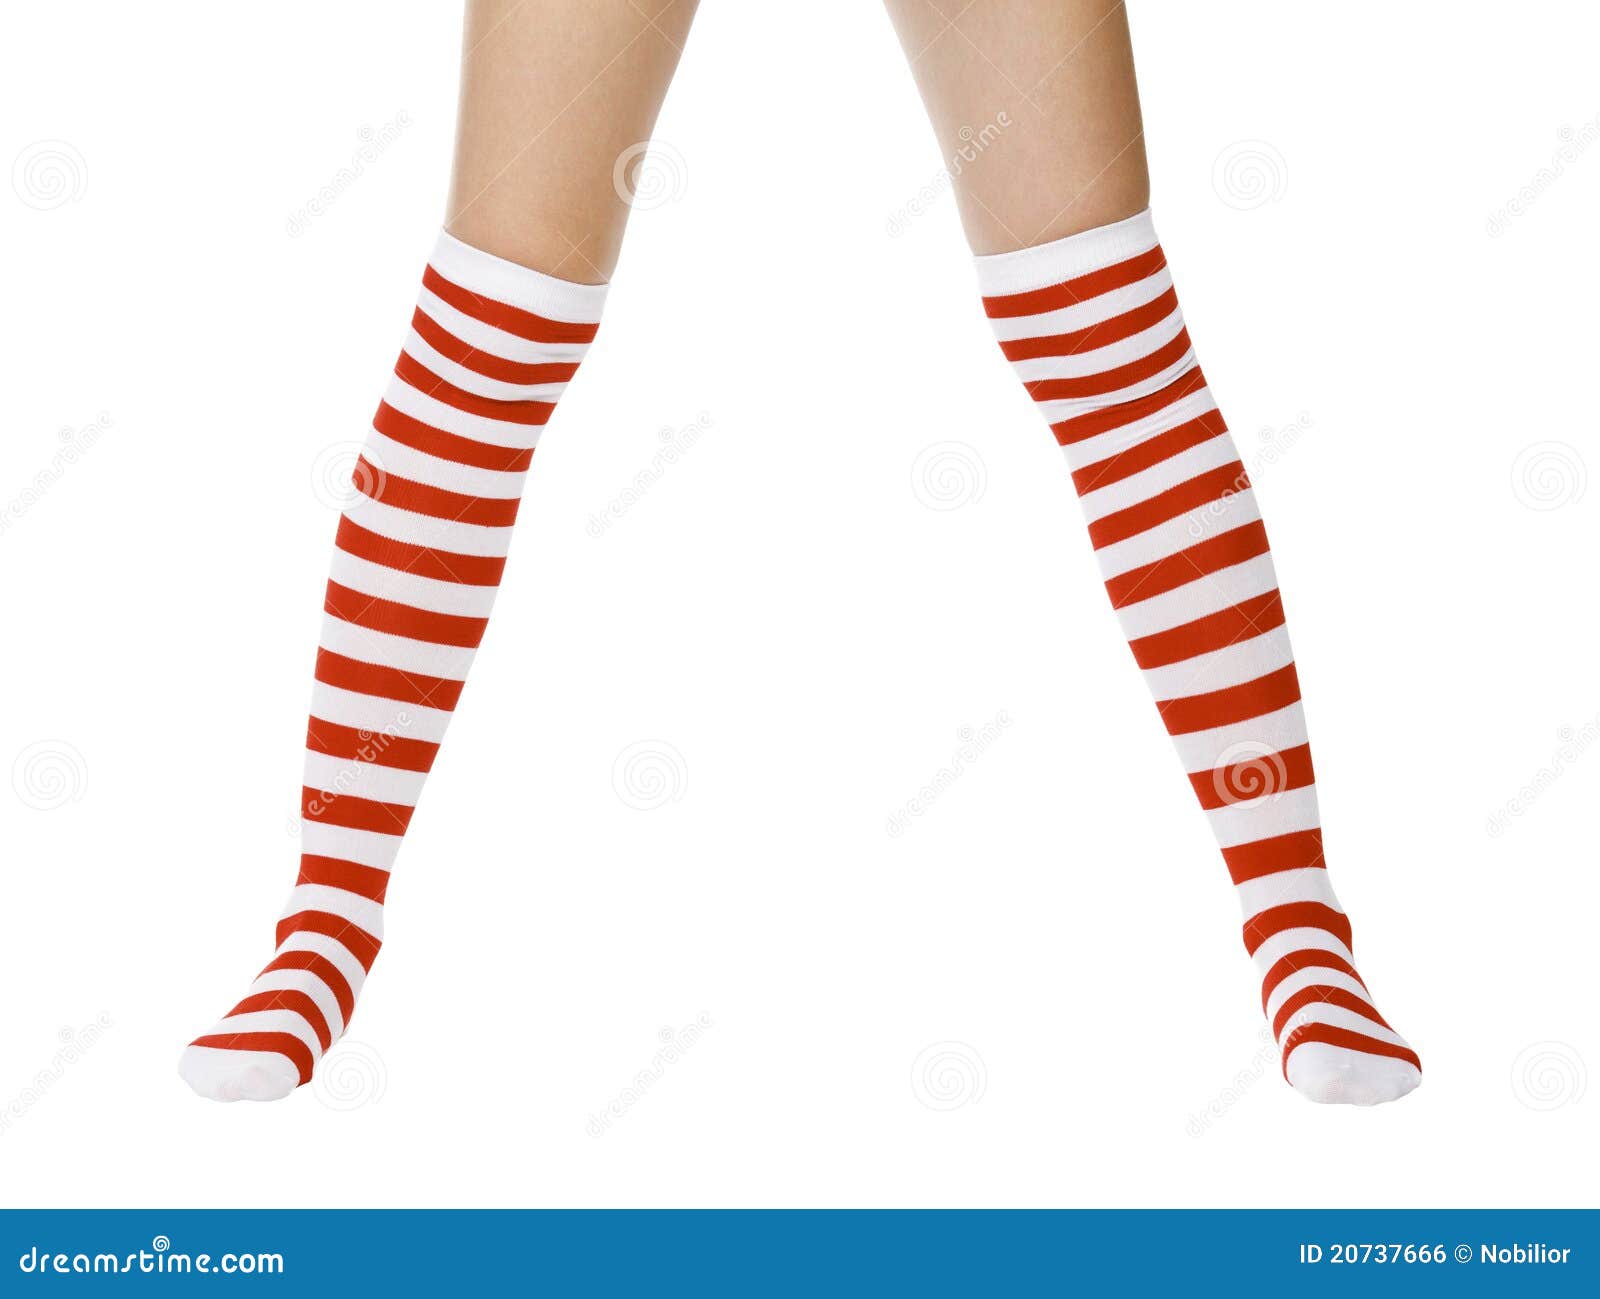 Christmas woman legs stock photo. Image of legs, colorful - 20737666